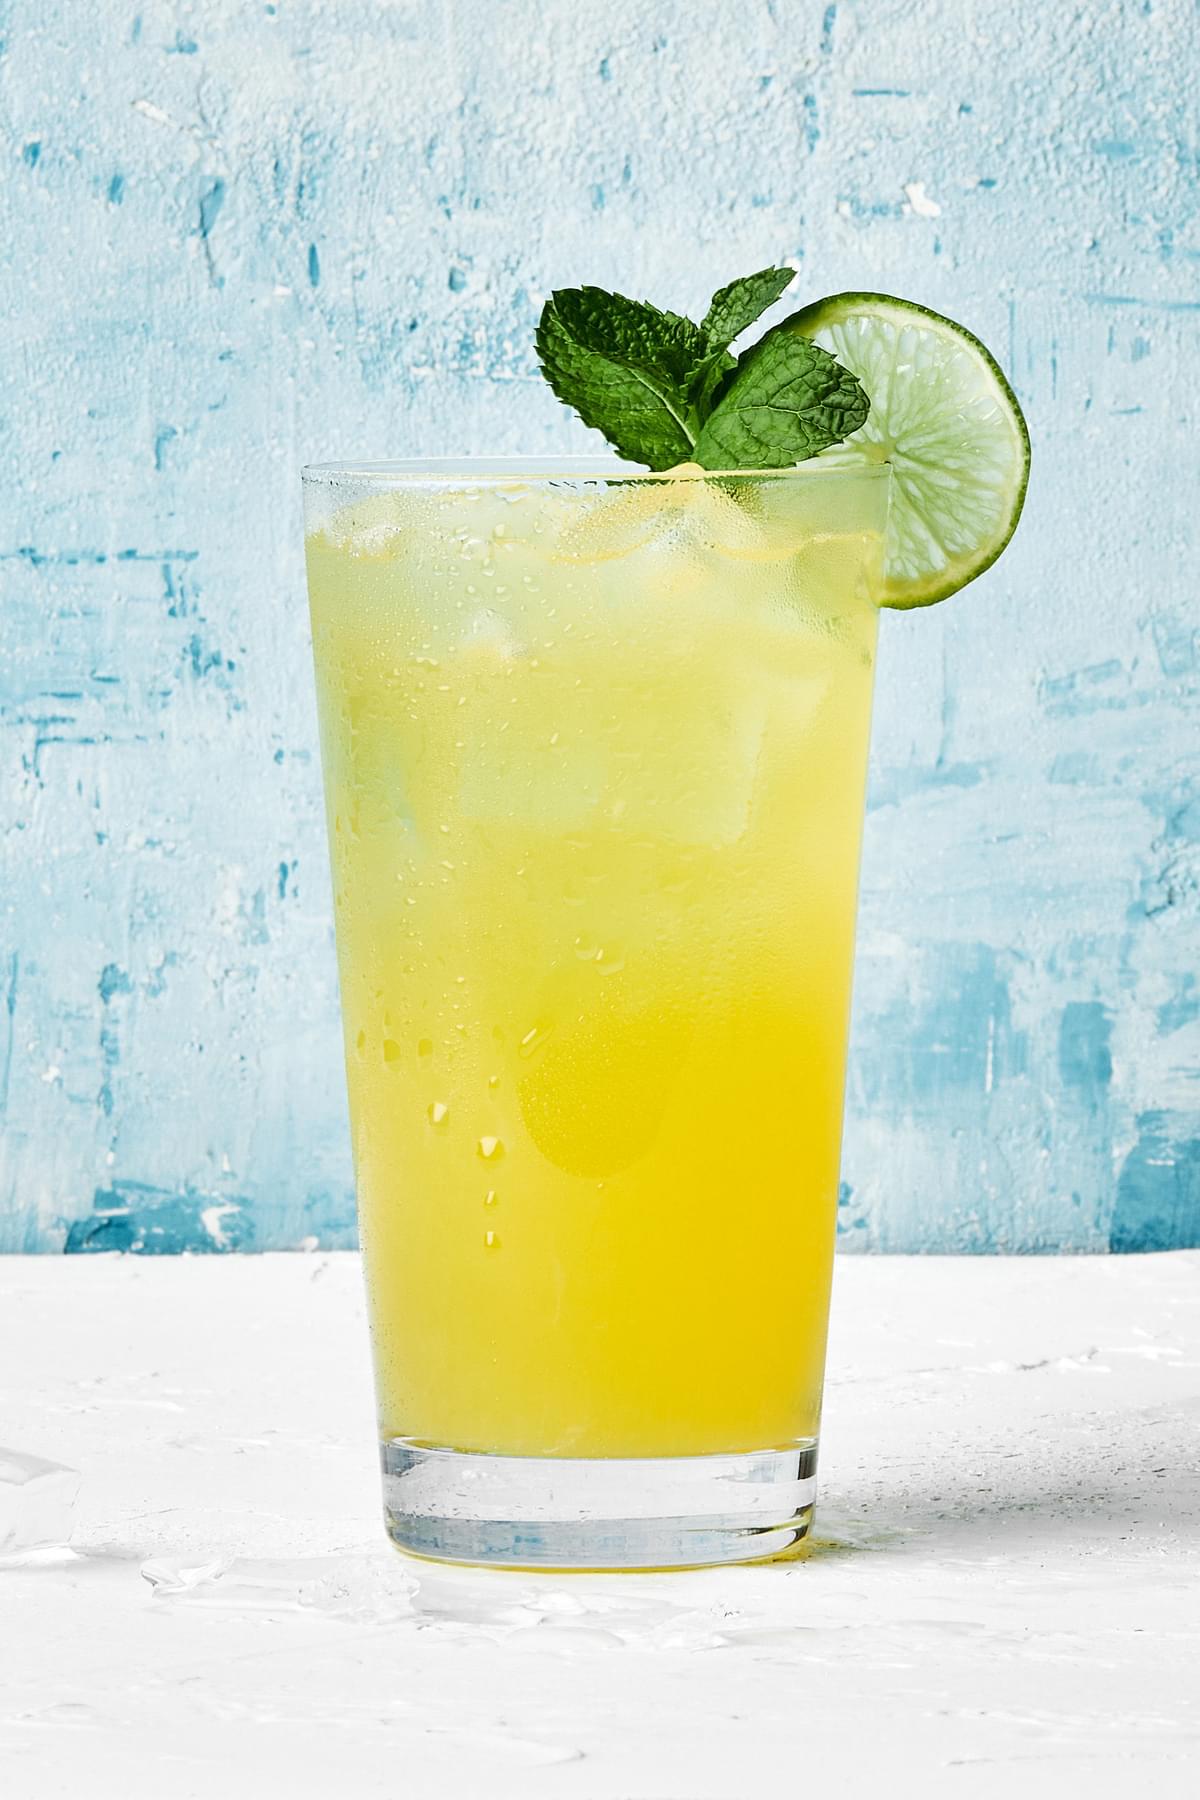 a glass of pineapple aqua fresca served over ice and garnished with fresh mint springs and a lime wedge